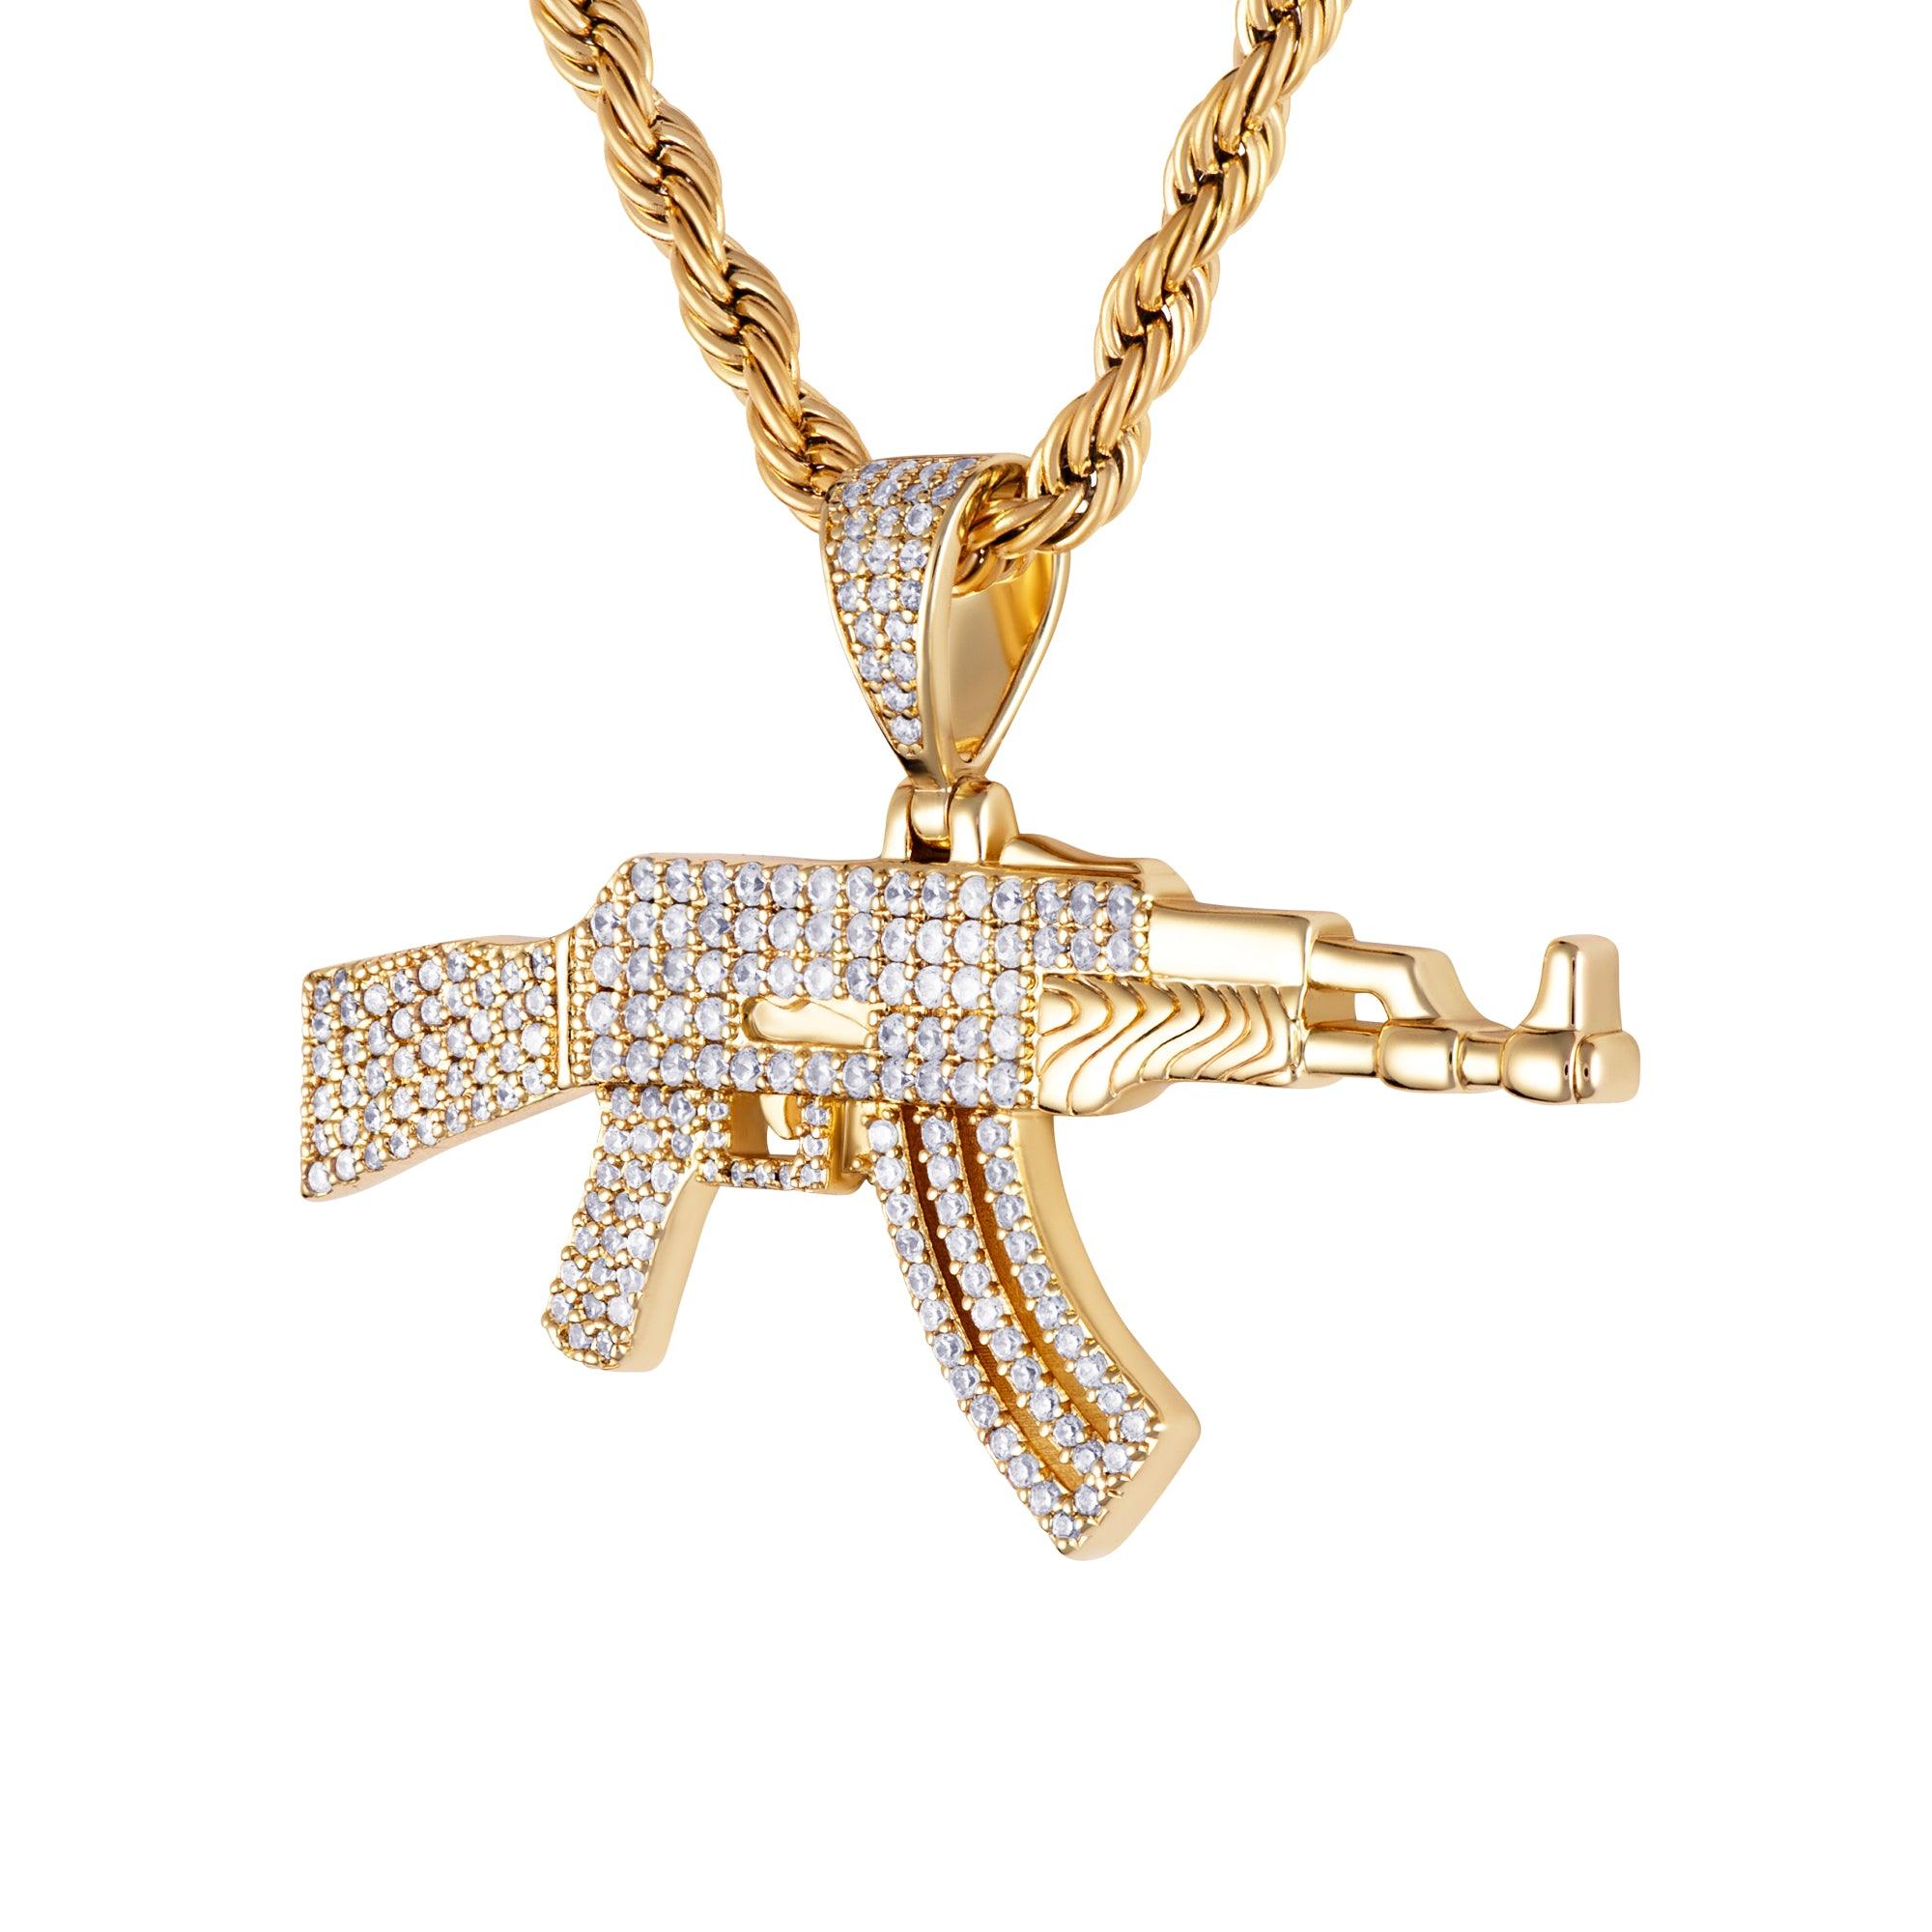 AK-47 Iced Out Pendant with 28